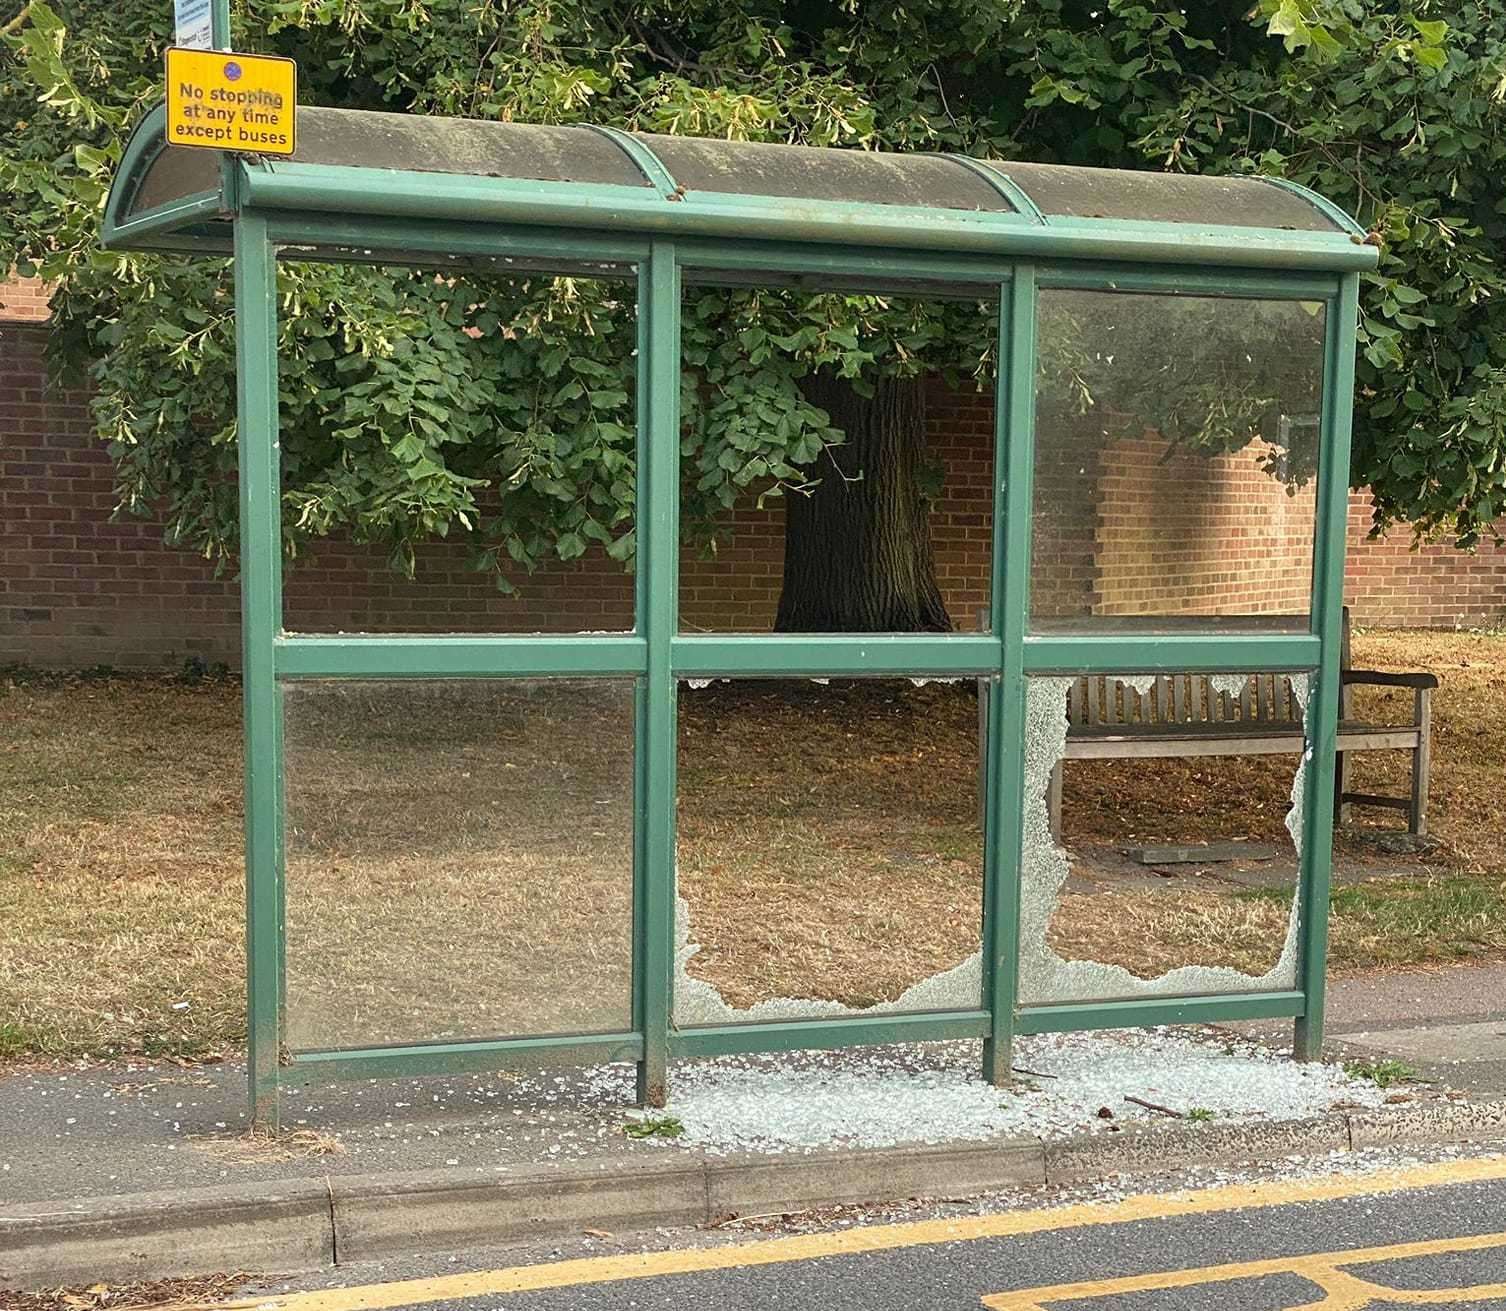 The bus shelter was targeted on two consecutive nights